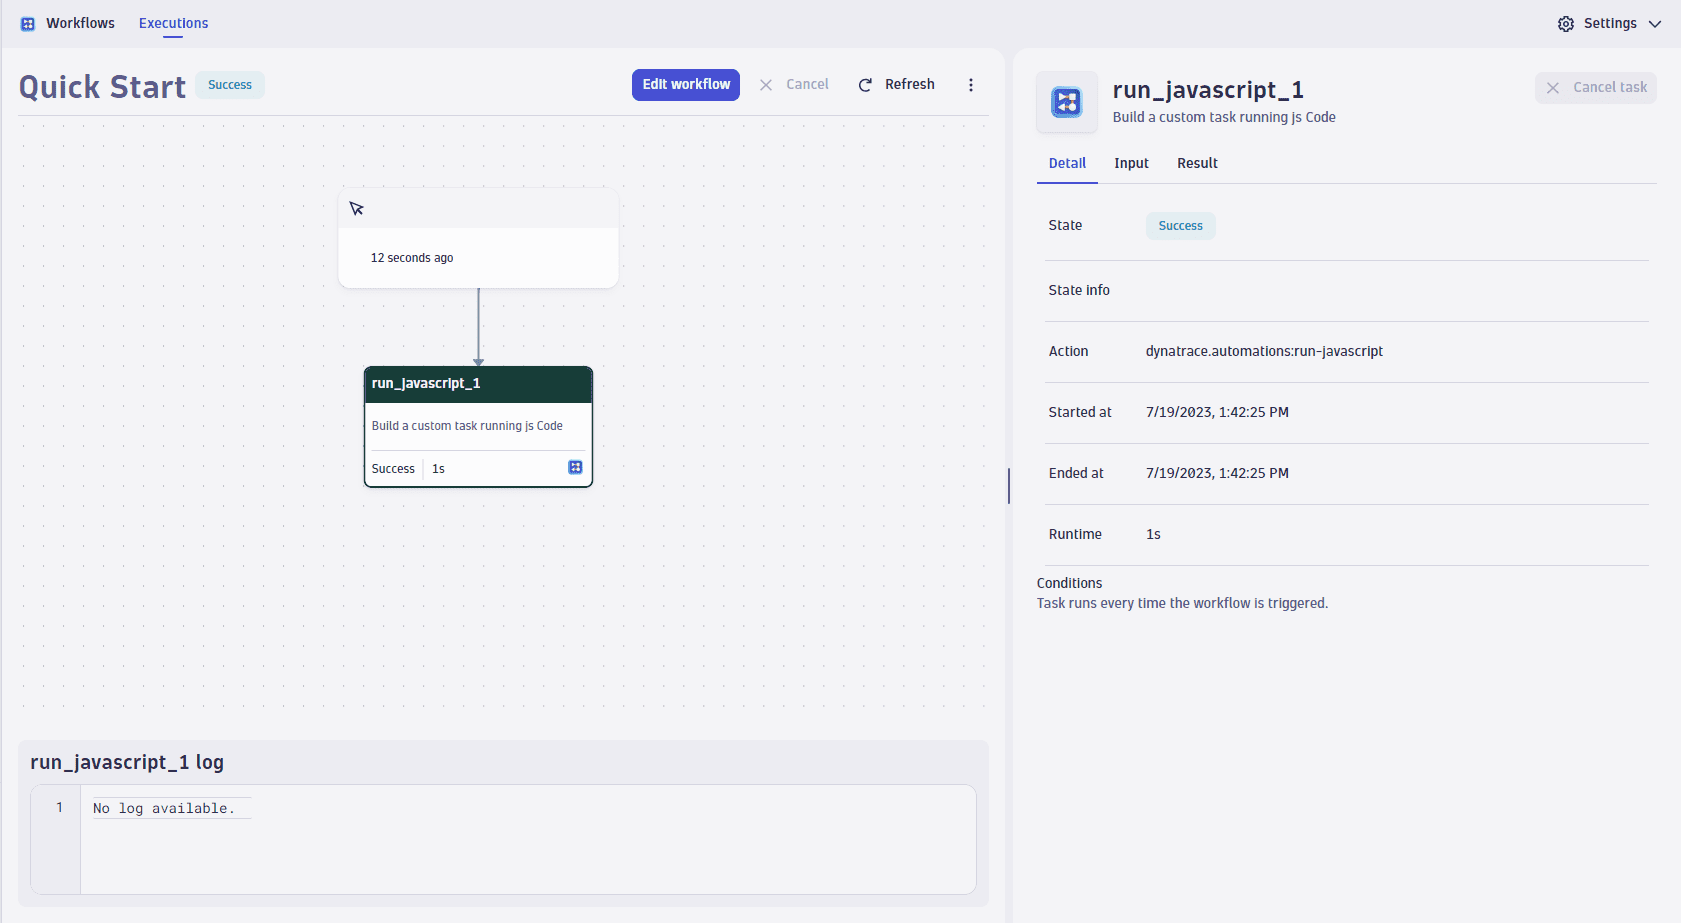 Workflow monitor after running first workflow successfully